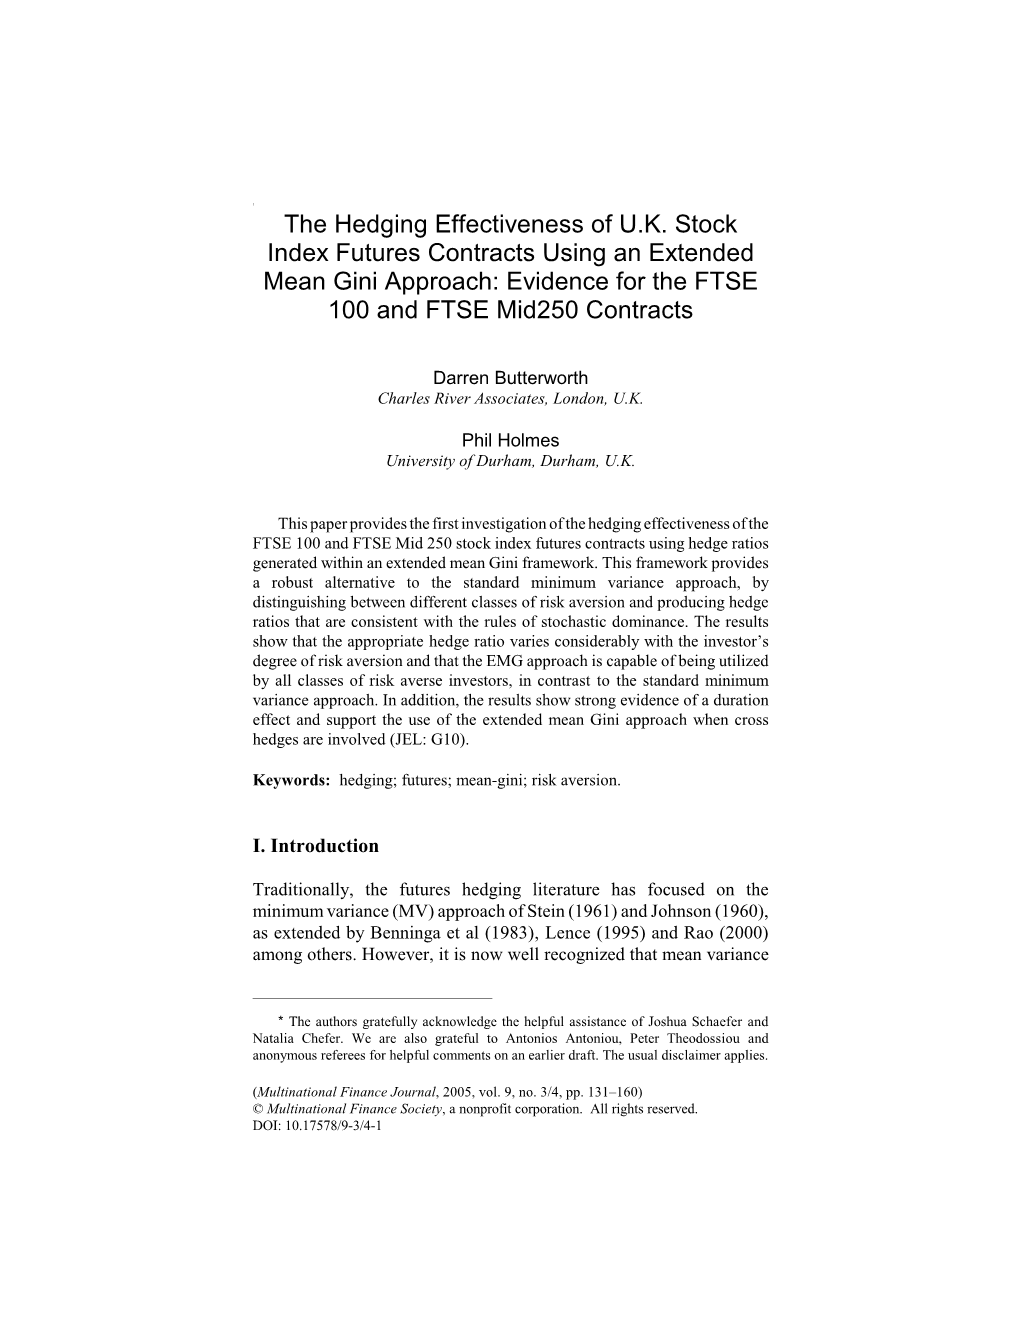 The Hedging Effectiveness of U.K. Stock Index Futures Contracts Using an Extended Mean Gini Approach: Evidence for the FTSE 100 and FTSE Mid250 Contracts